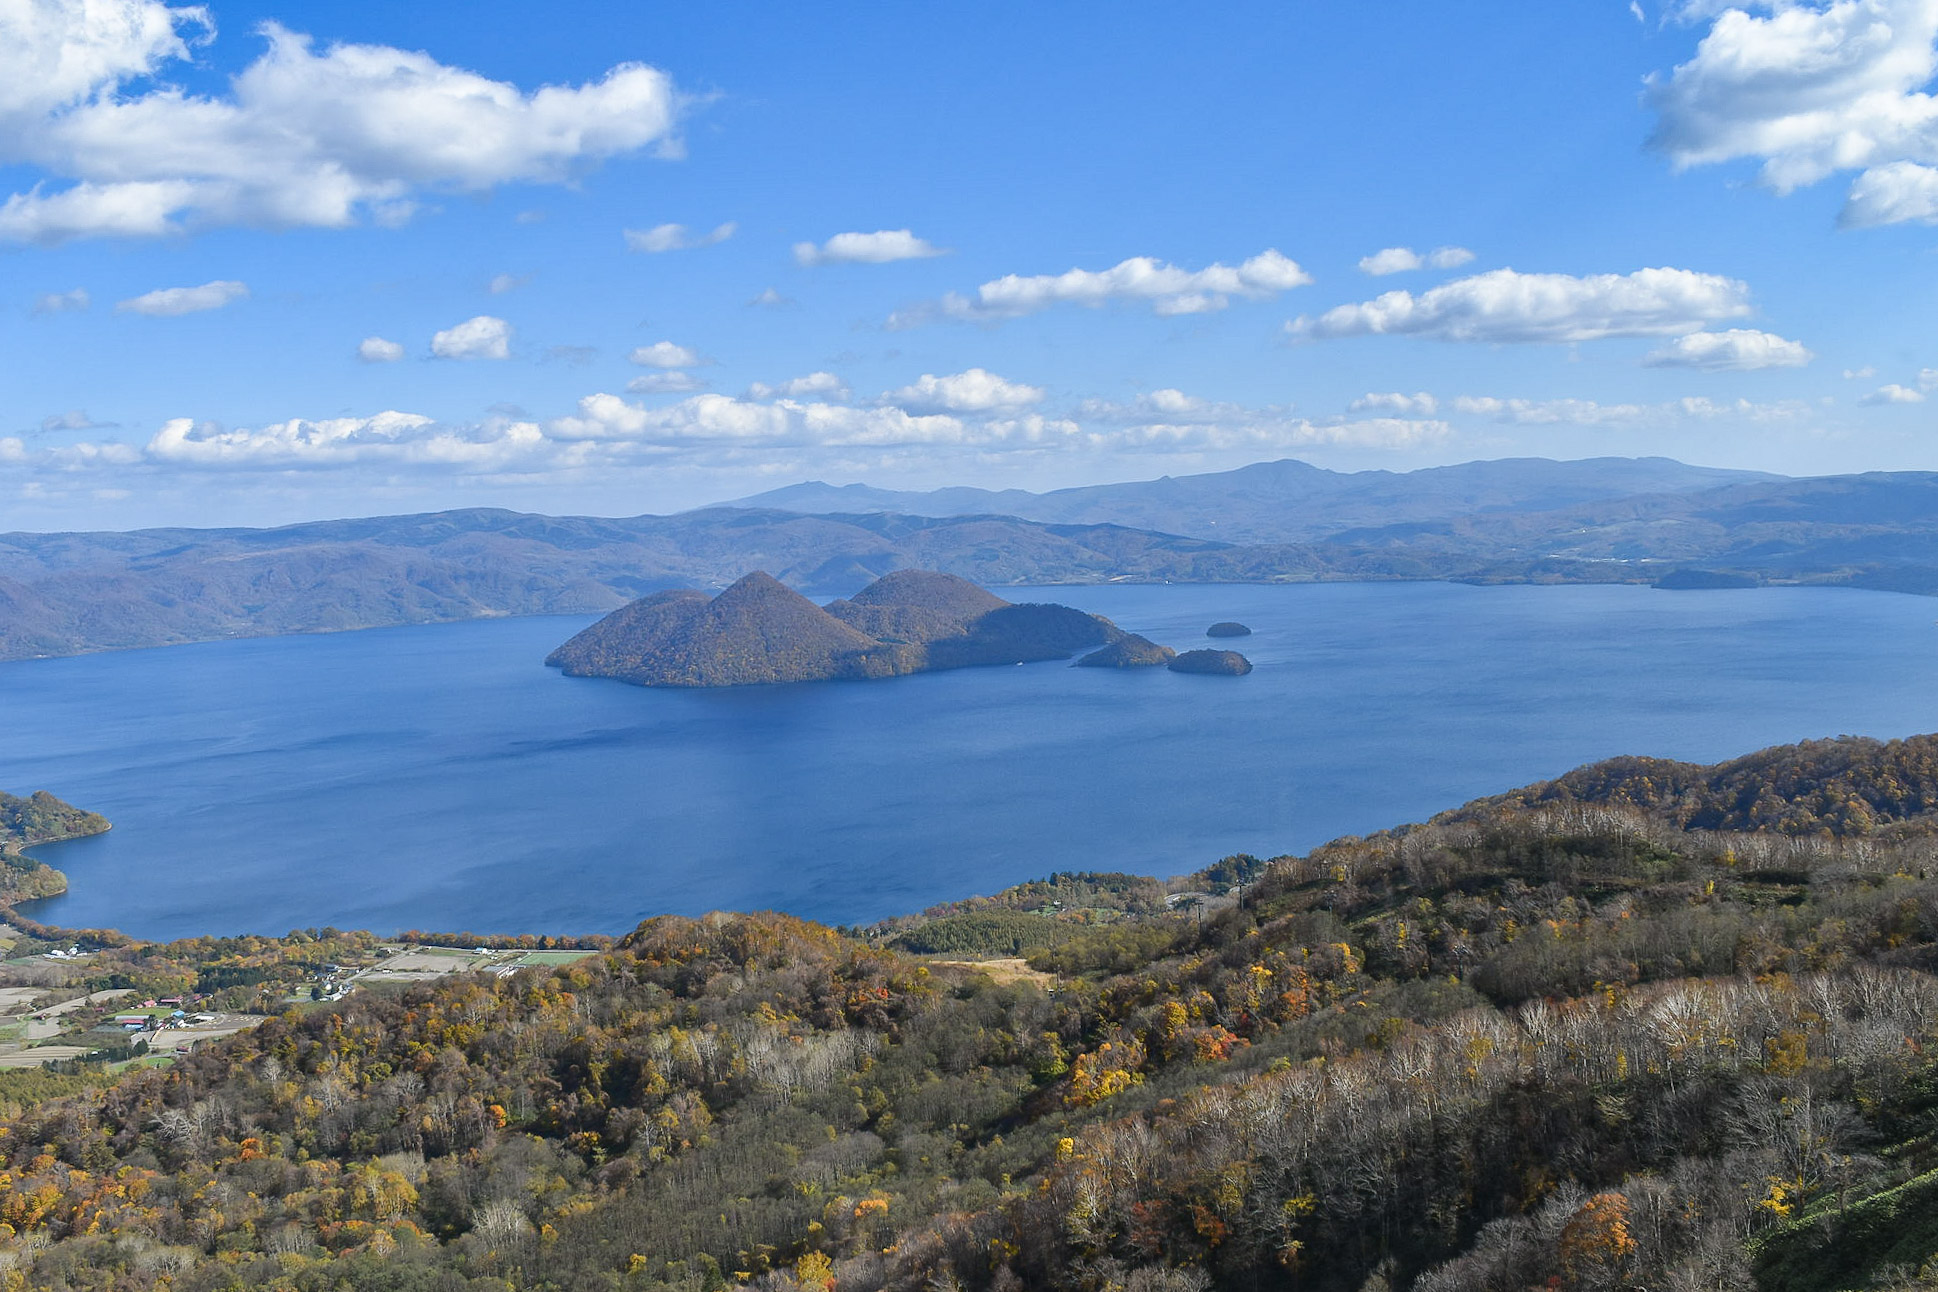 A view of Lake Toya from up high. Most of the lake is visible. Nakajima Island is visible in the middle of the lake. It is a bright, sunny day.